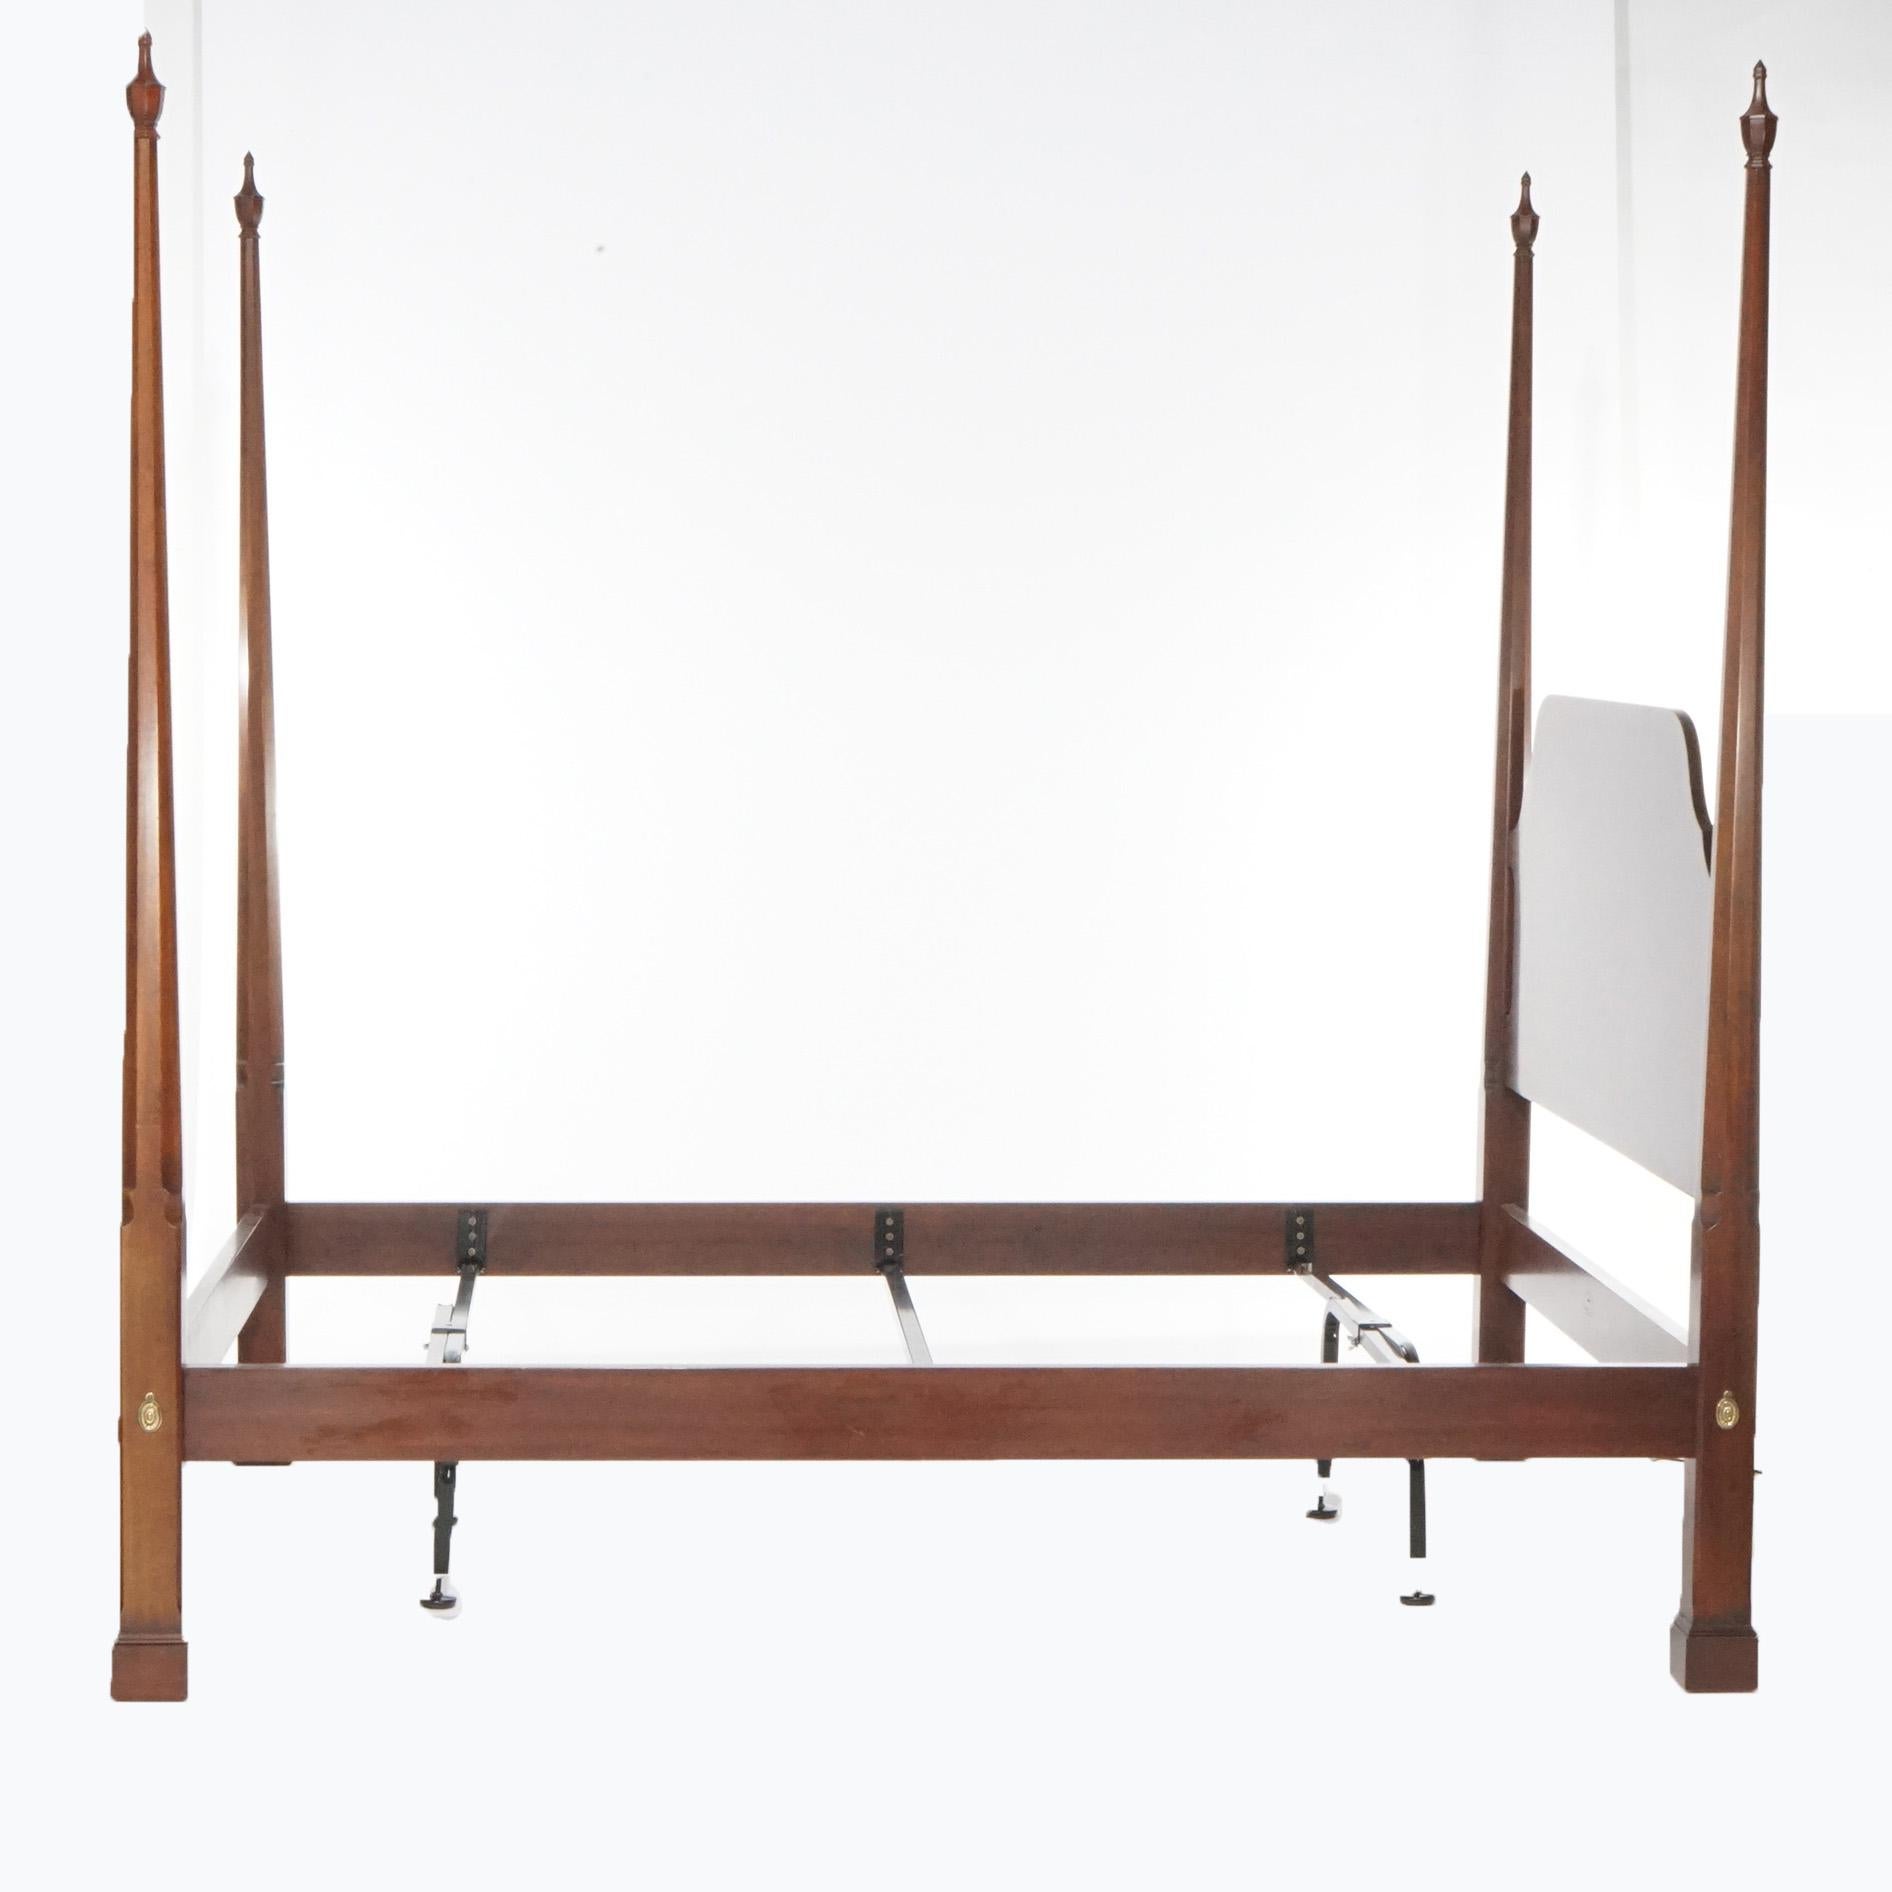 A Federal style queen size bed frame by Henkel Harris offers mahogany construction with turned posts, maker mark as photographed, 20th century.

Measures- 86.75''H x 67.25''W x 87.25''D; Rack is 13.75''H x 61''W x 82''D